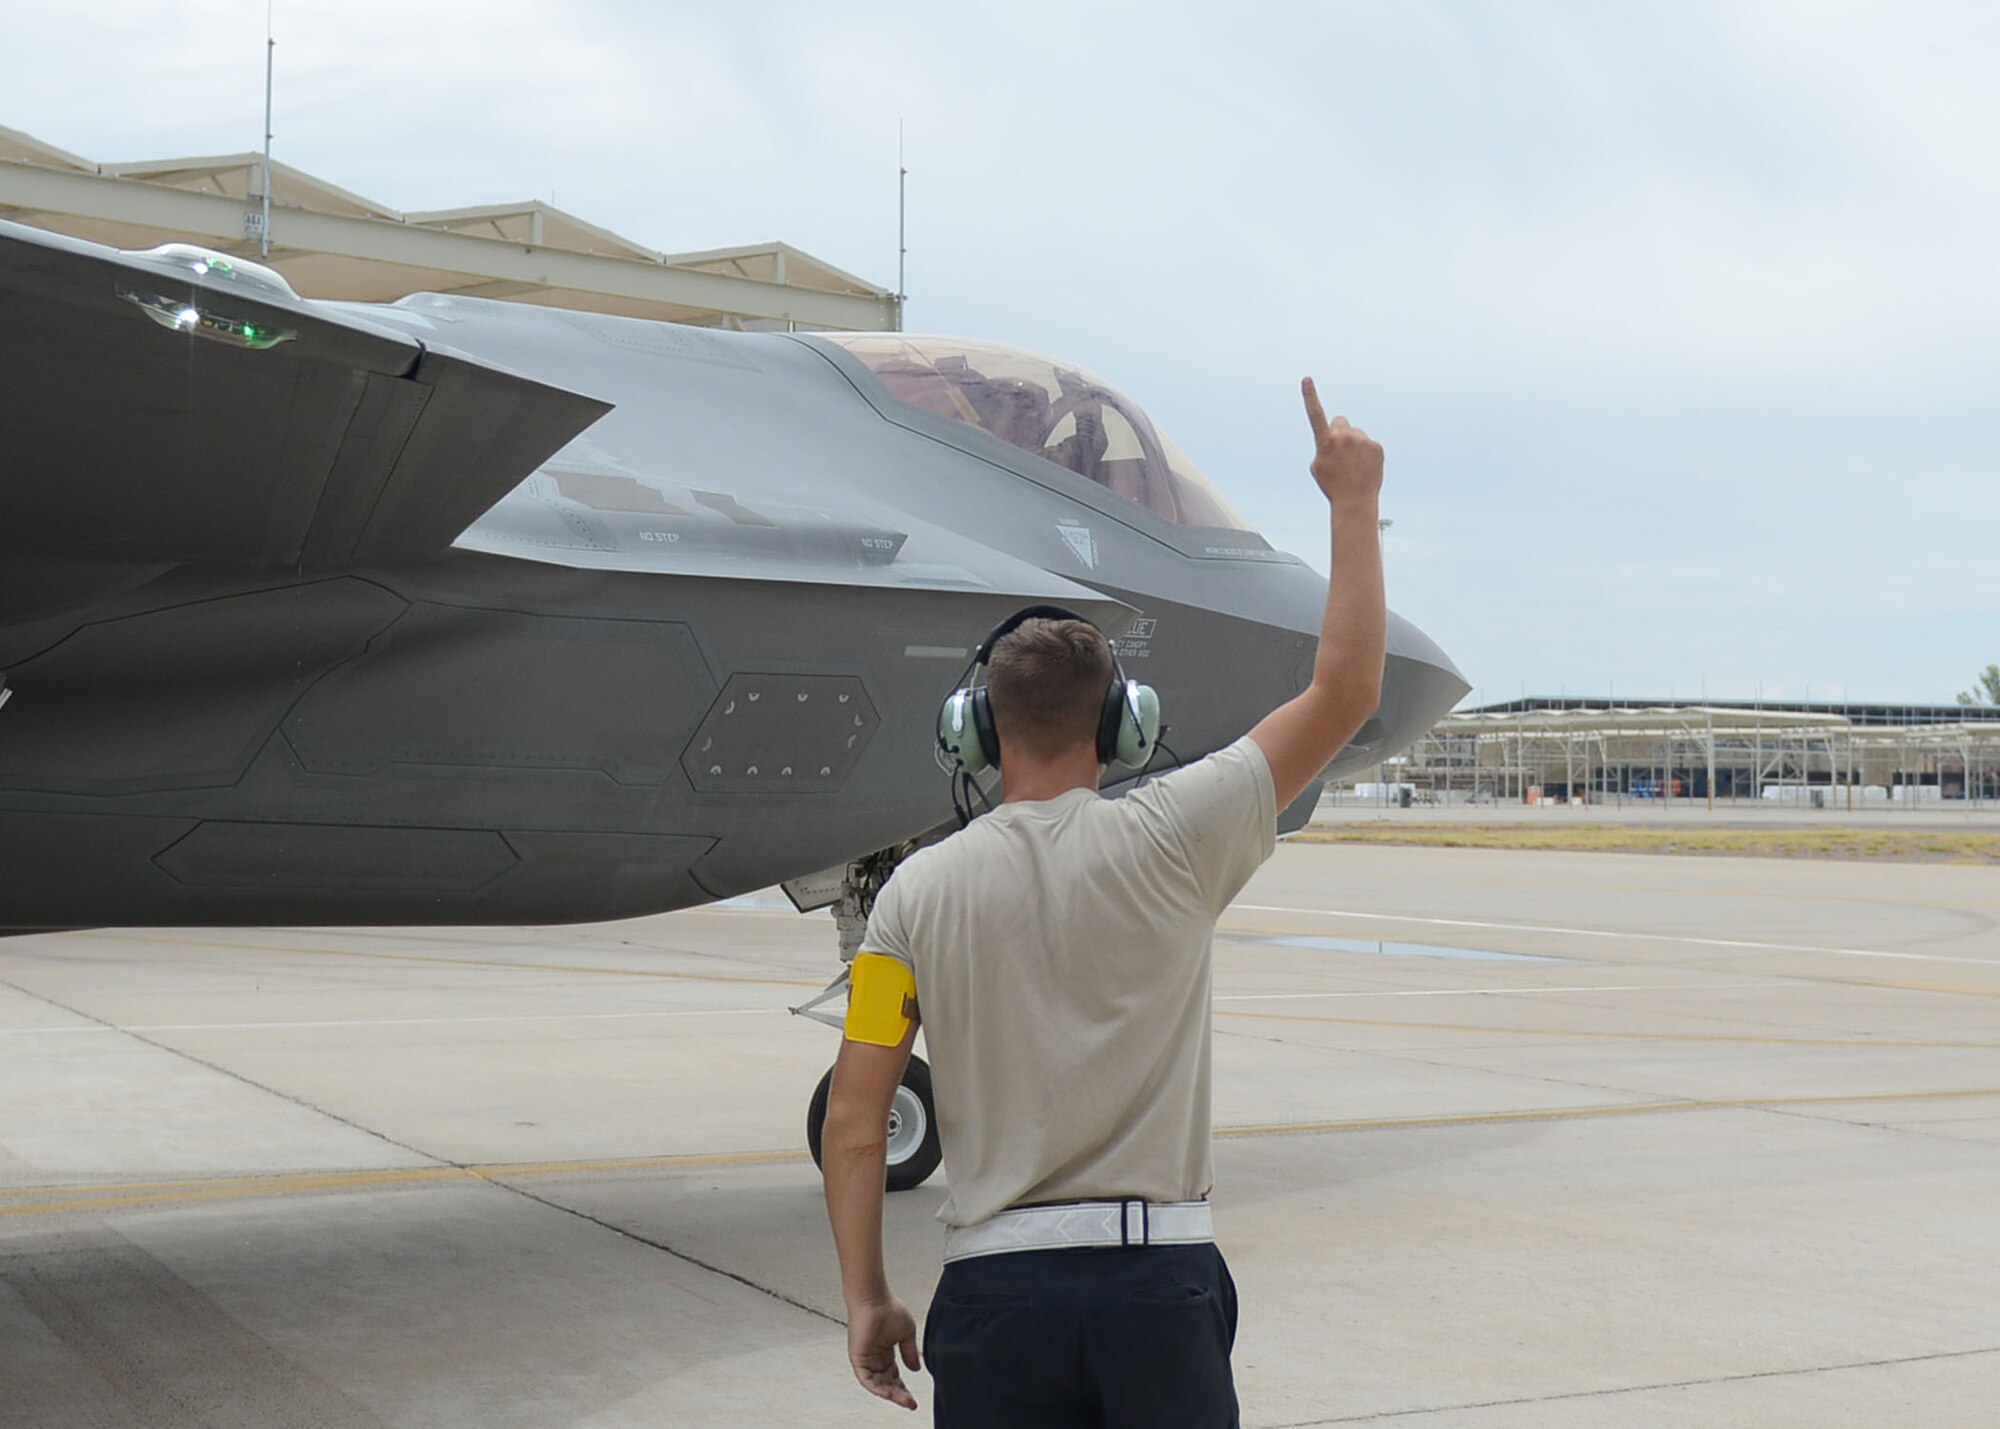 Airman Dalton Woods, 61st Aircraft Maintenance Unit crew chief, sends off 1st Lt. Jeff Teufel, 61st Fighter Squadron basic course student, at Luke Air Force Base, Ariz., July 17, 2017. Woods launched and assisted with recovery of Teufel’s aircraft ensuring his safety during his capstone flight. (U.S. Air Force photo/Senior Airman James Hensley)